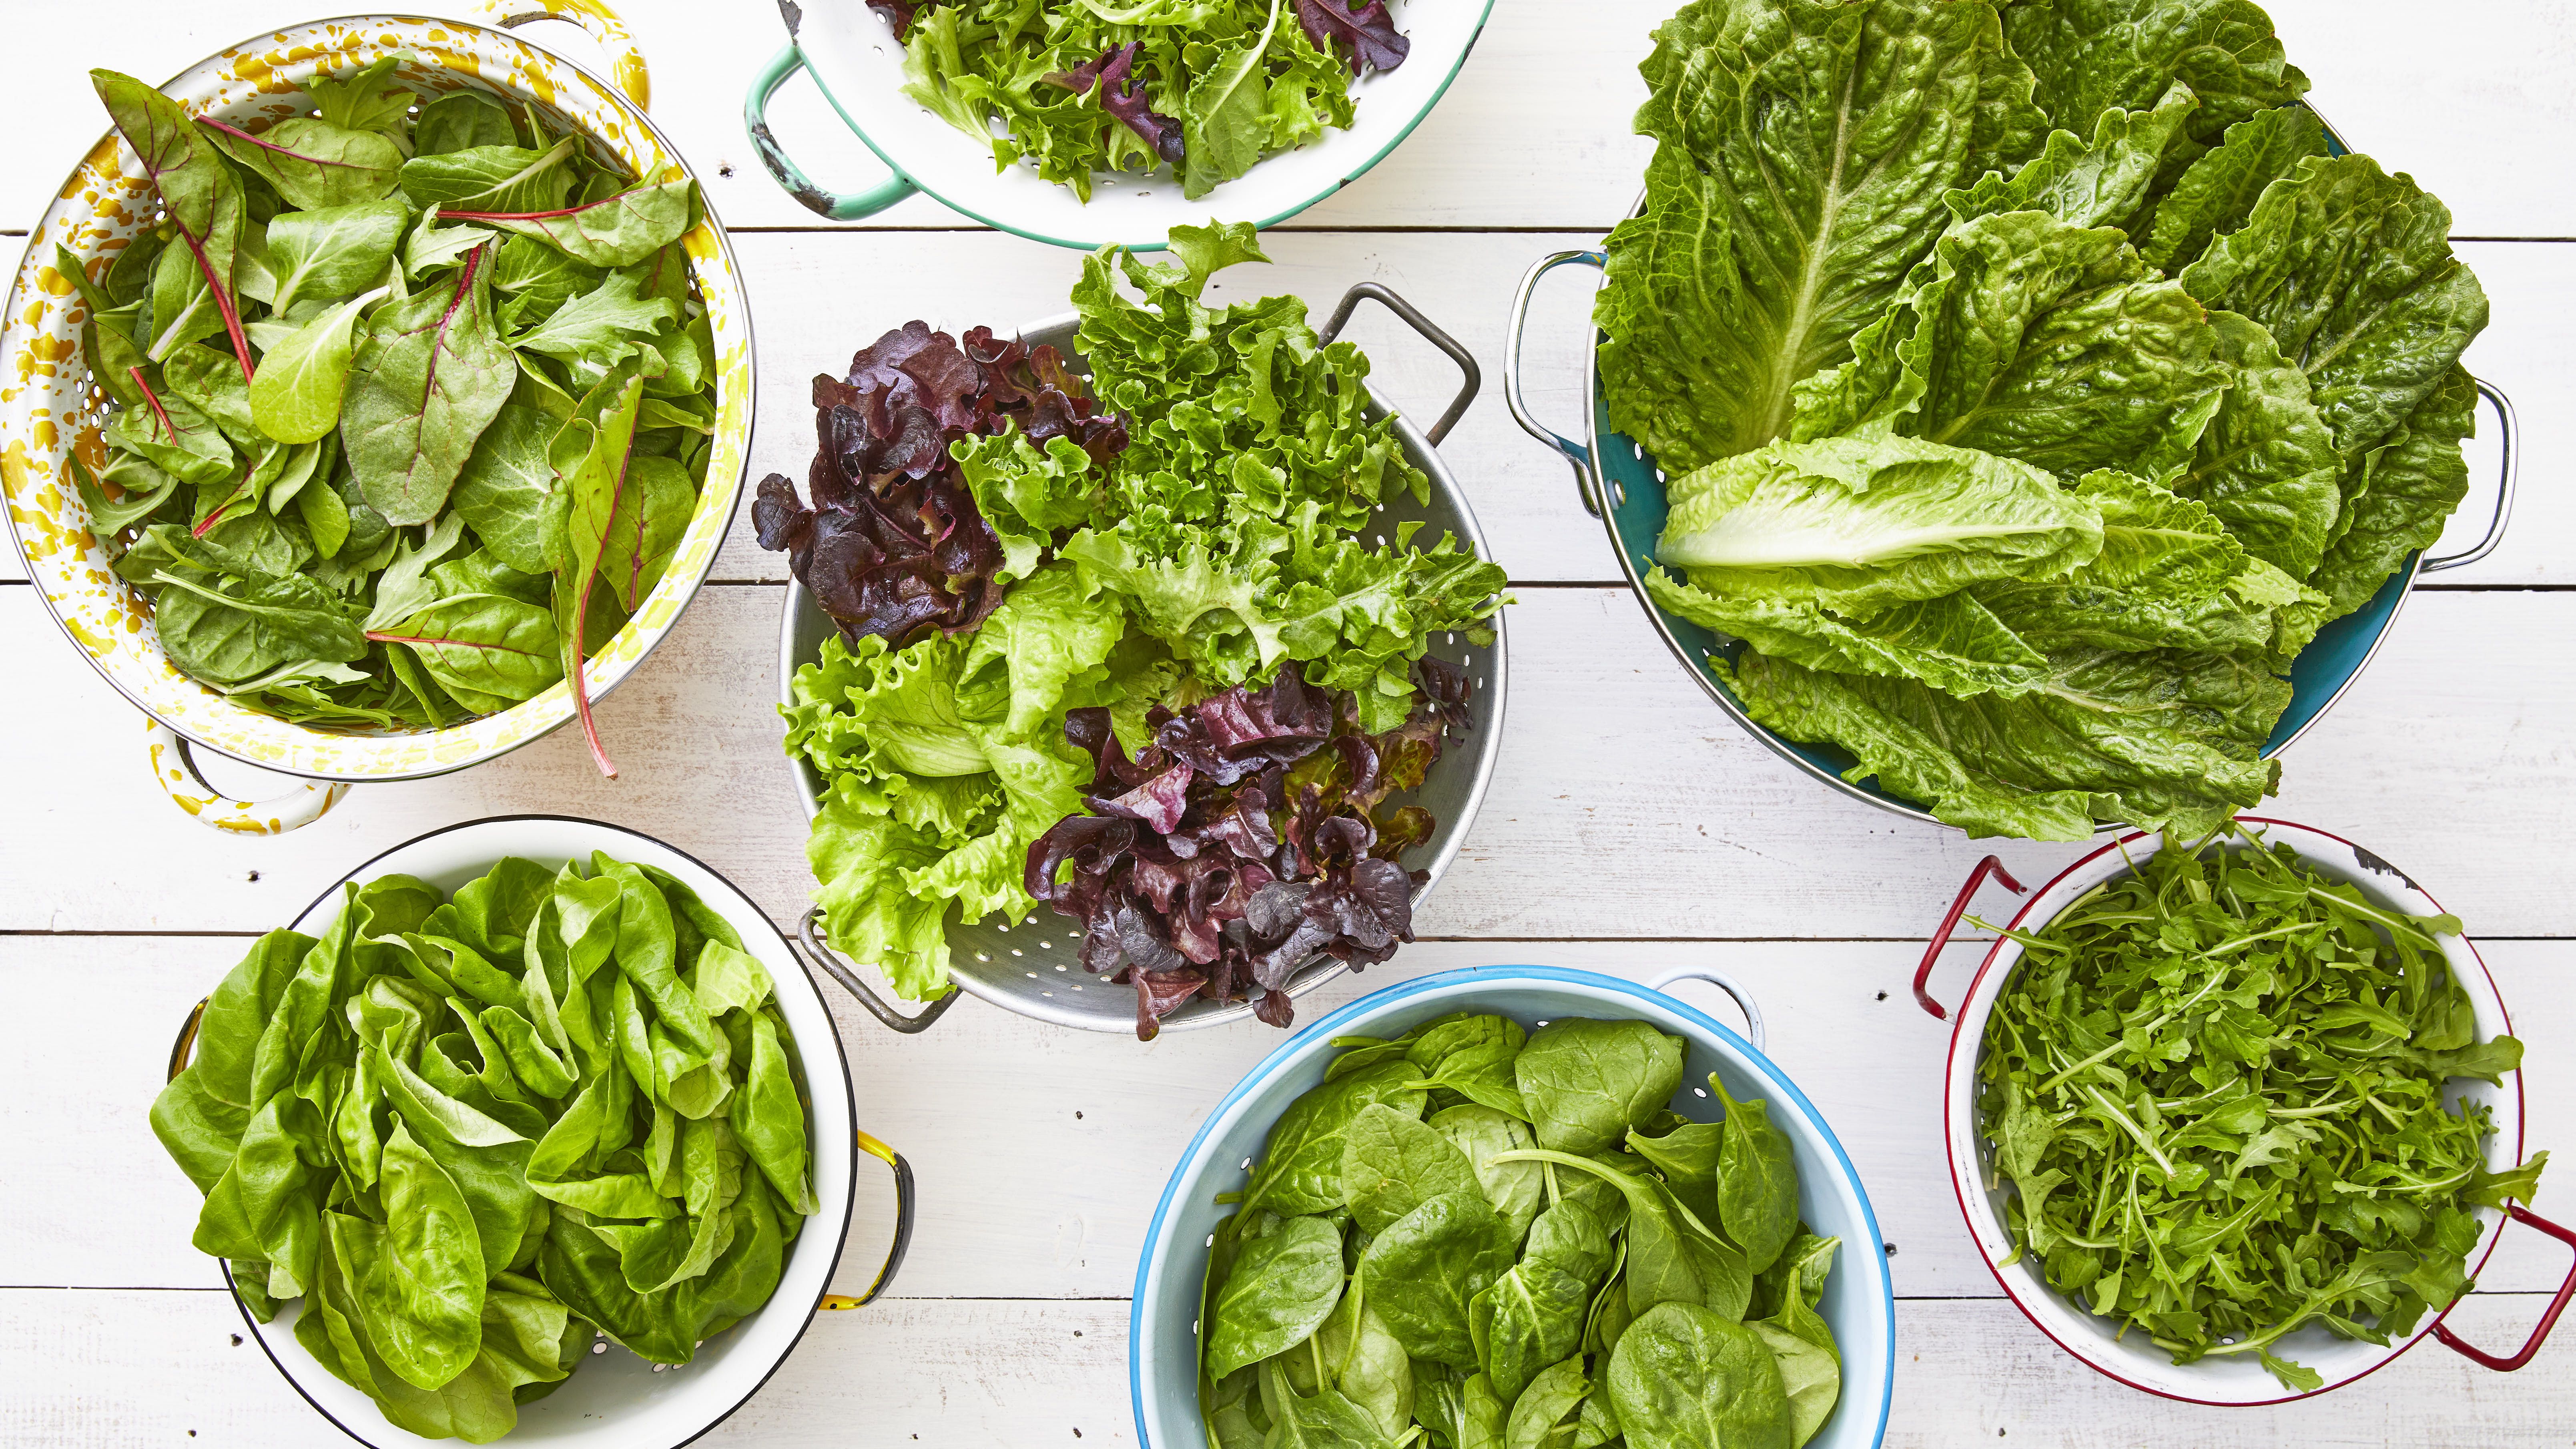 20 Types of Lettuce - Different Kinds of Lettuce and How to Use Them